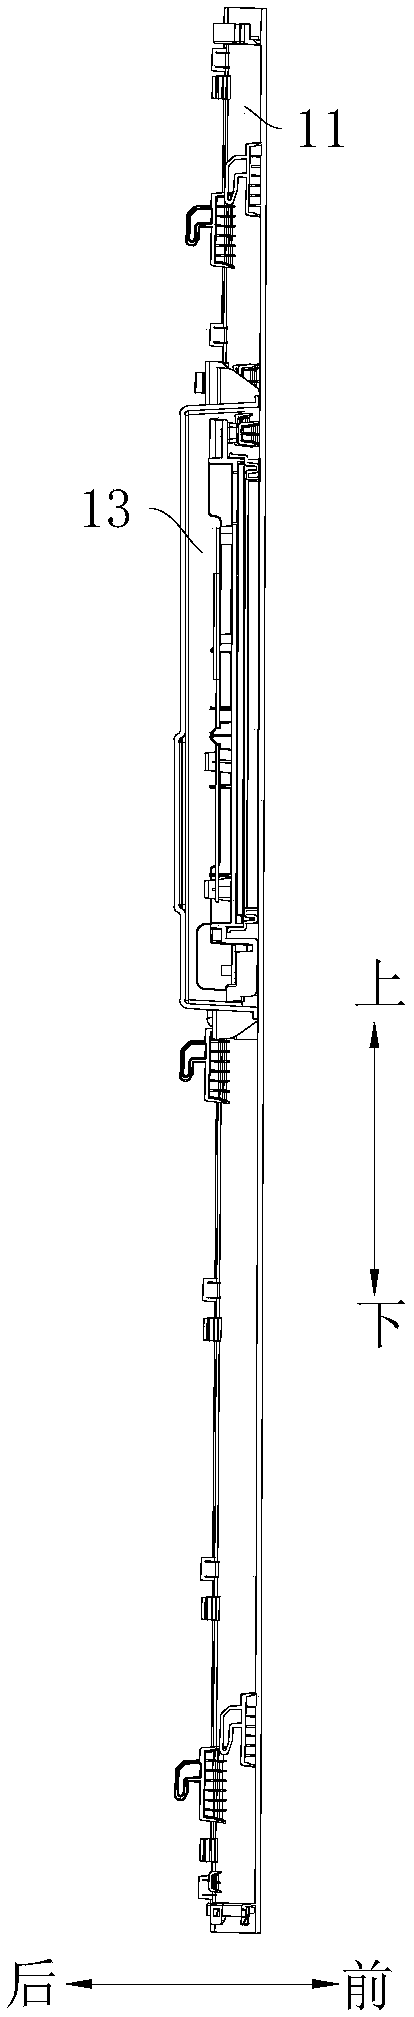 Display module and air treatment device